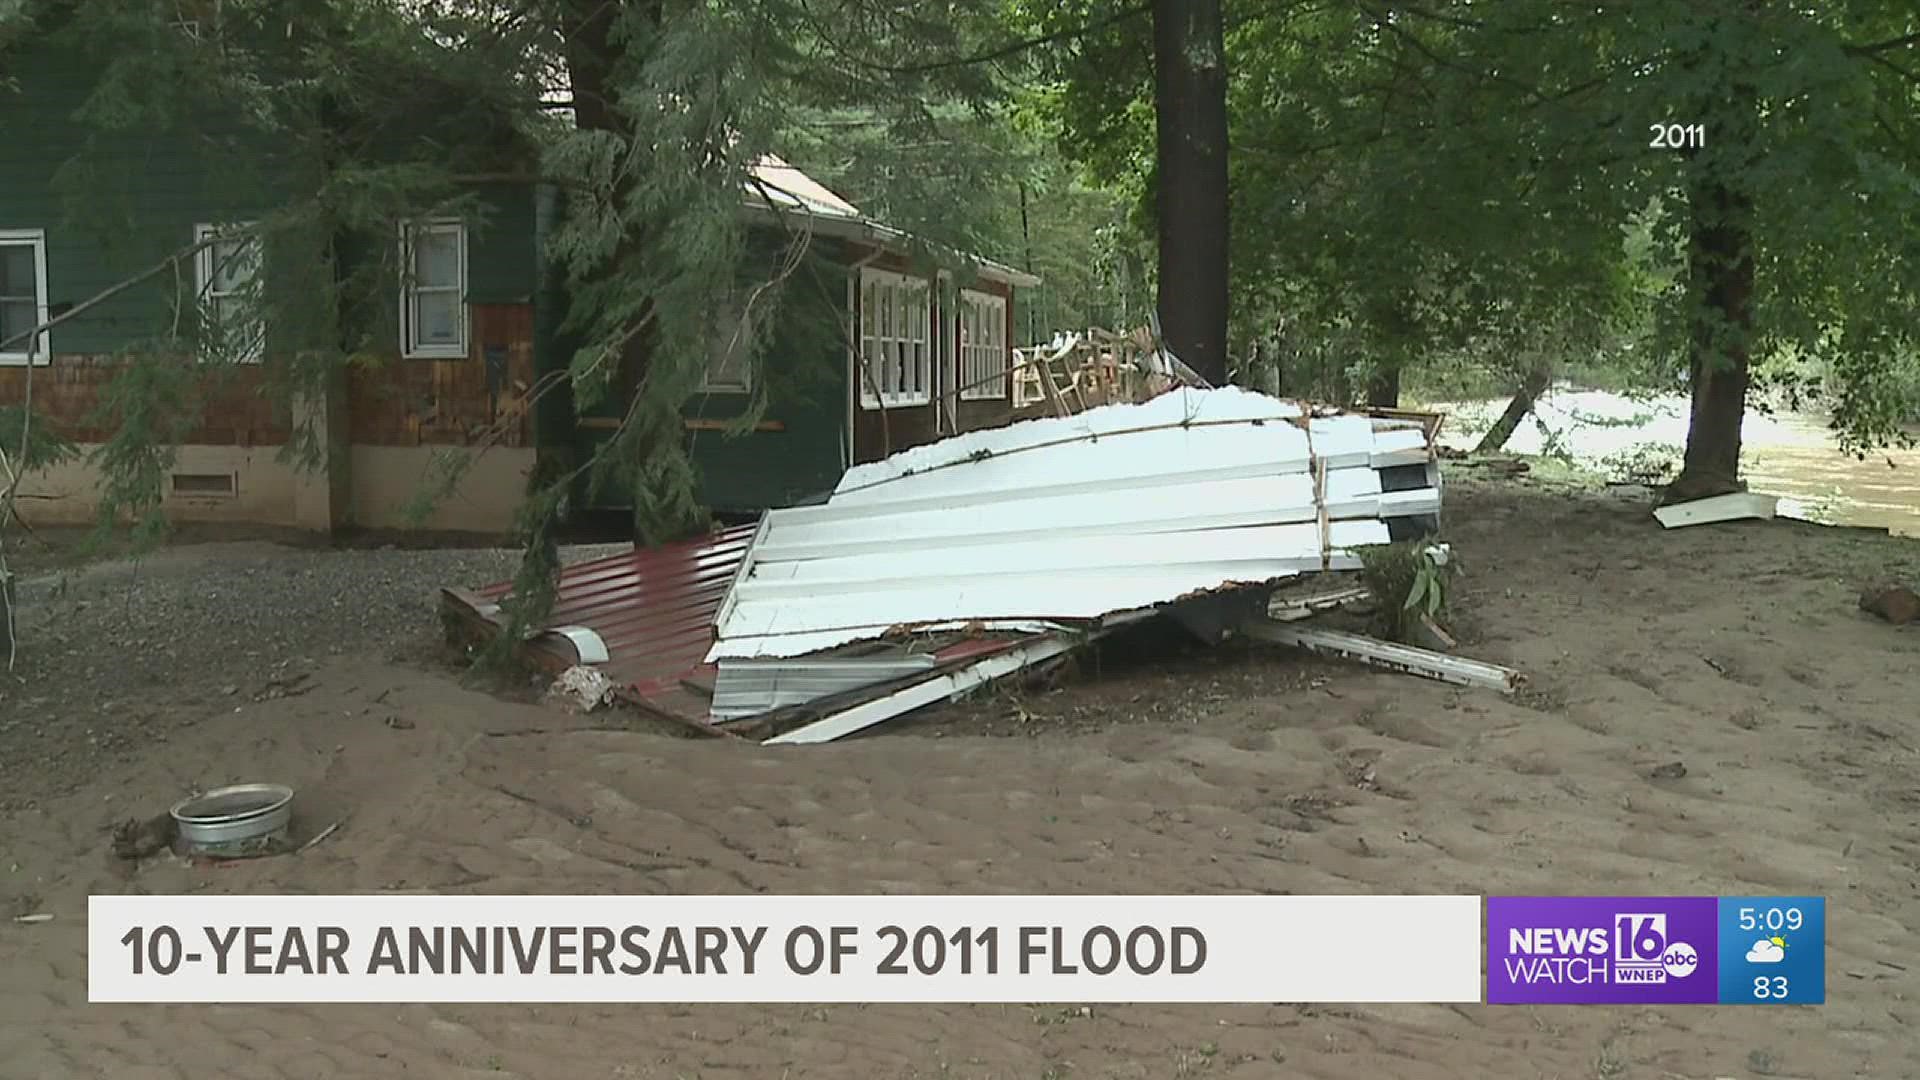 It has been 10 years since the flooding caused by Tropical Storm Lee devastated rural parts of Lycoming County.